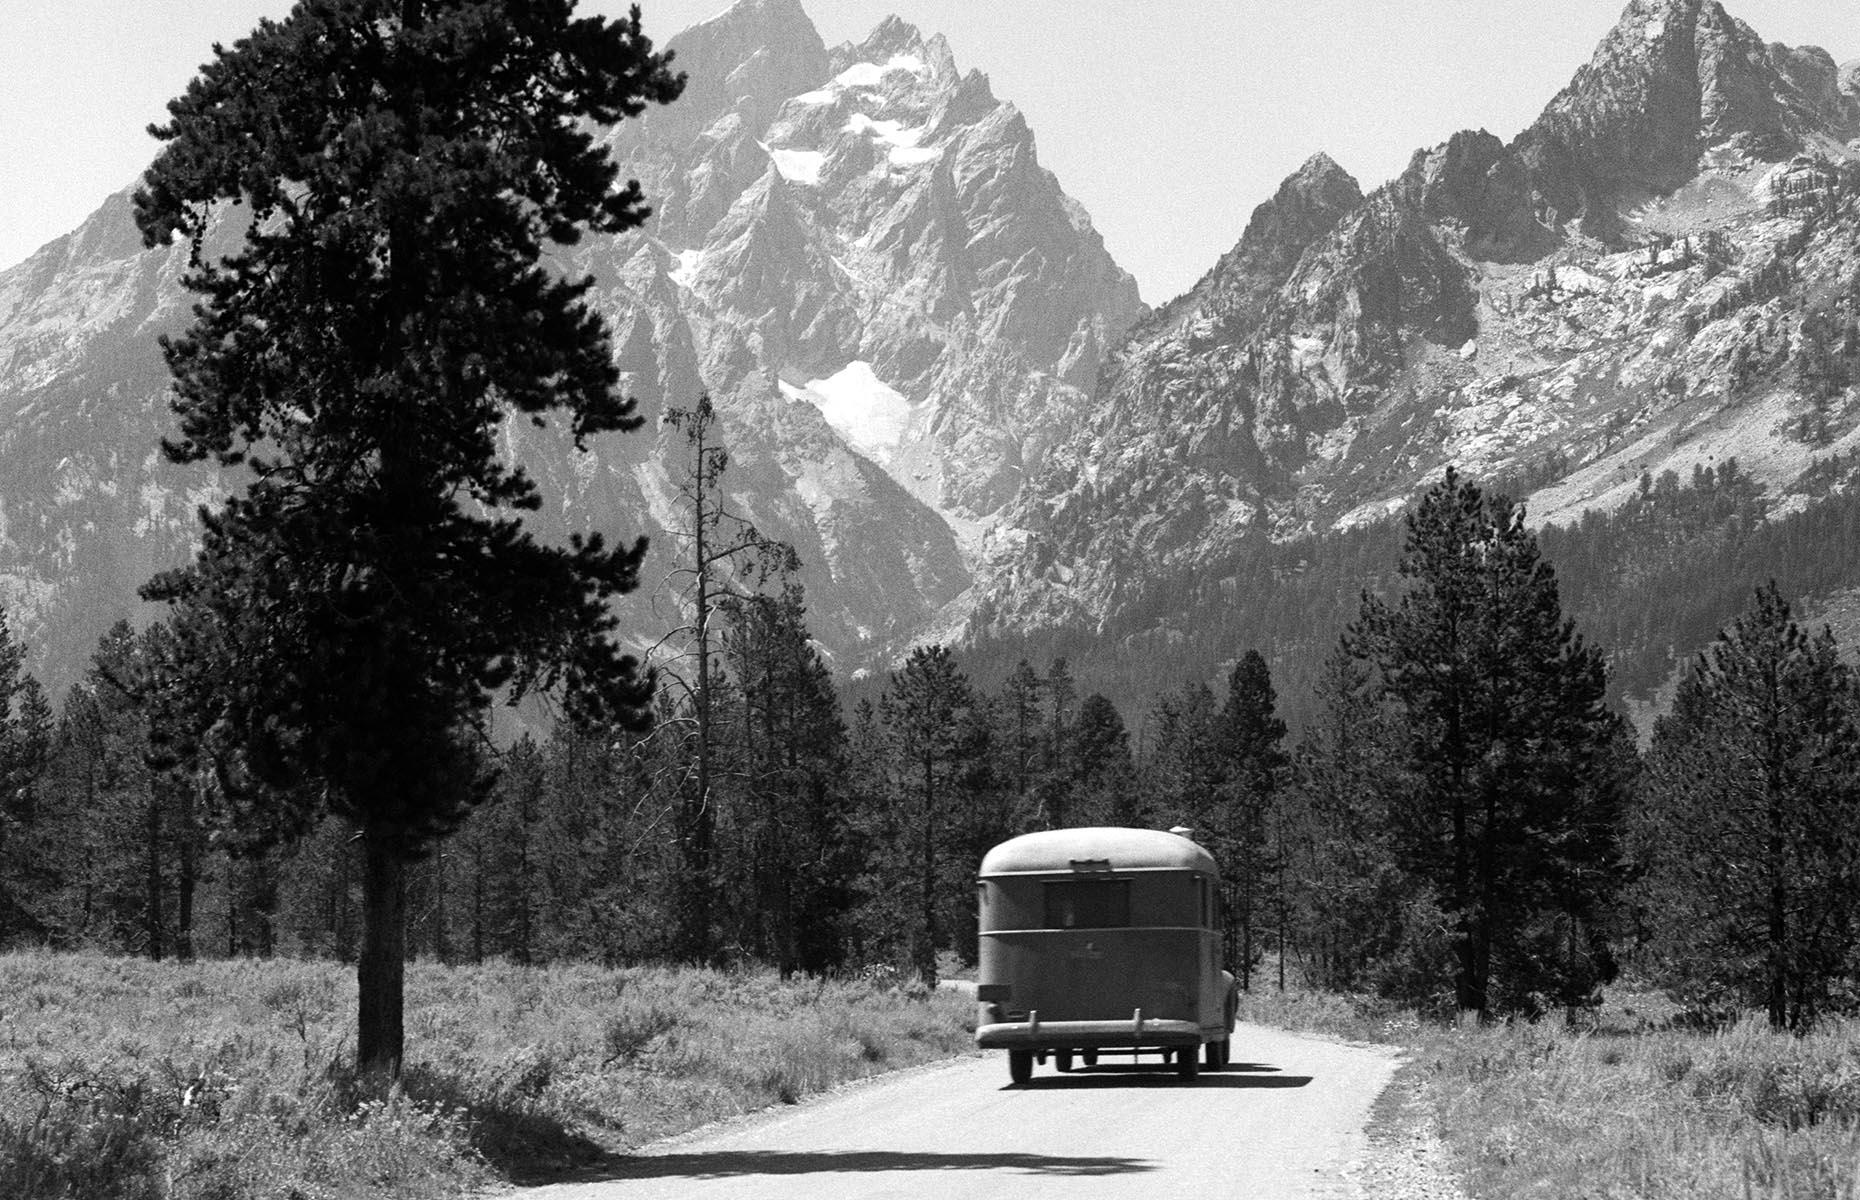 The Second World War put the production of RVs on the back-burner once more, as manufacturing efforts went into producing artillery, military vehicles and aircraft. But this glorious shot from the tail end of the Forties shows America's appetite for the open road was still strong. It shows a car and trailer rattling through Grand Teton National Park in the 1940s.